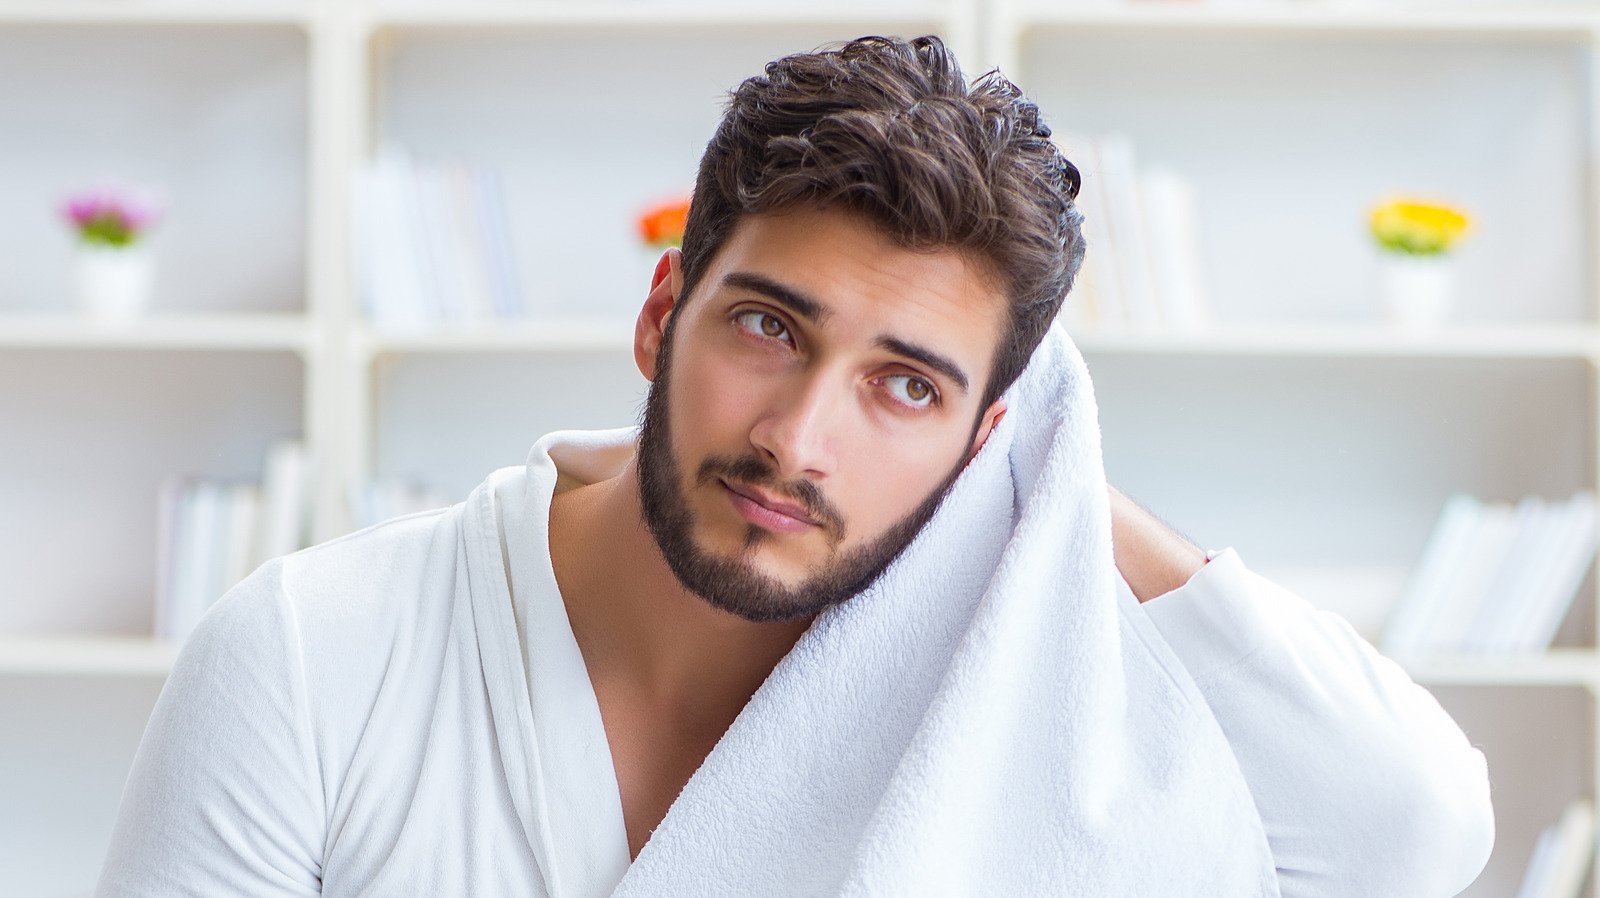 The Real Reason You Shouldn't Use A Towel To Dry Your Hair